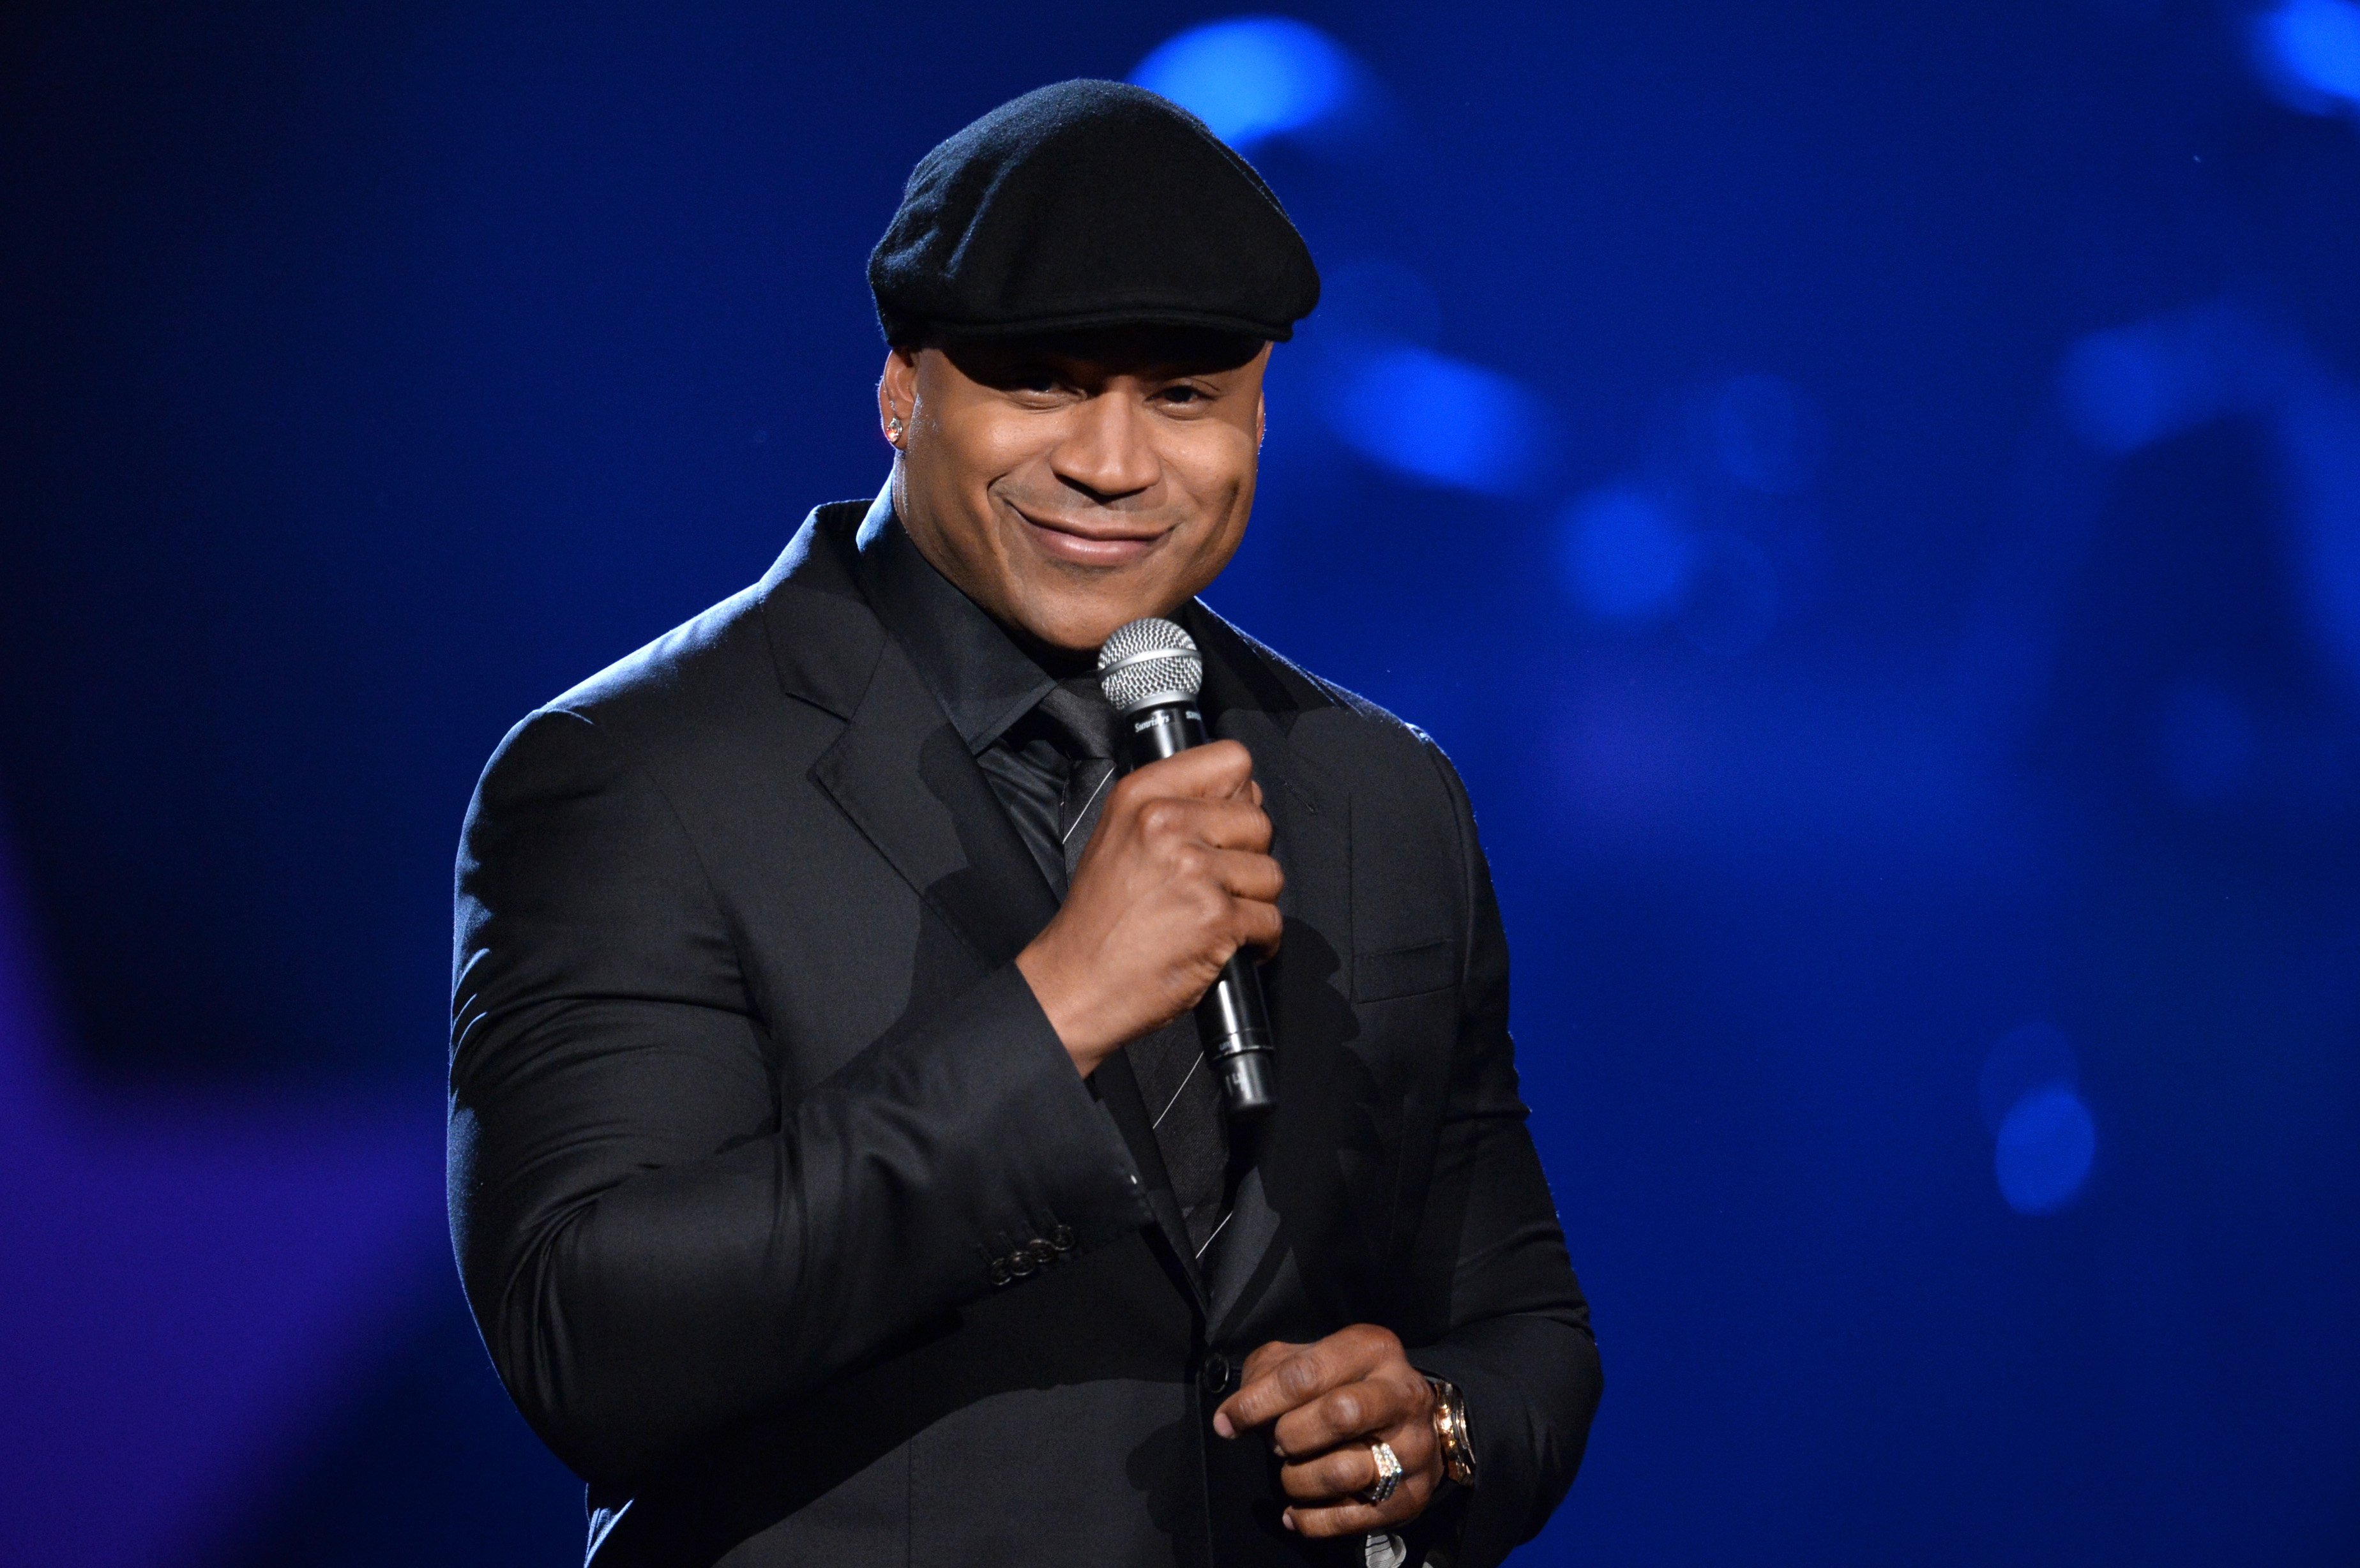 LL Cool J speaks at “A Grammy Salute to the Beatles" at the LA Convention Center on January 27, 2014. | Photo: Getty Images